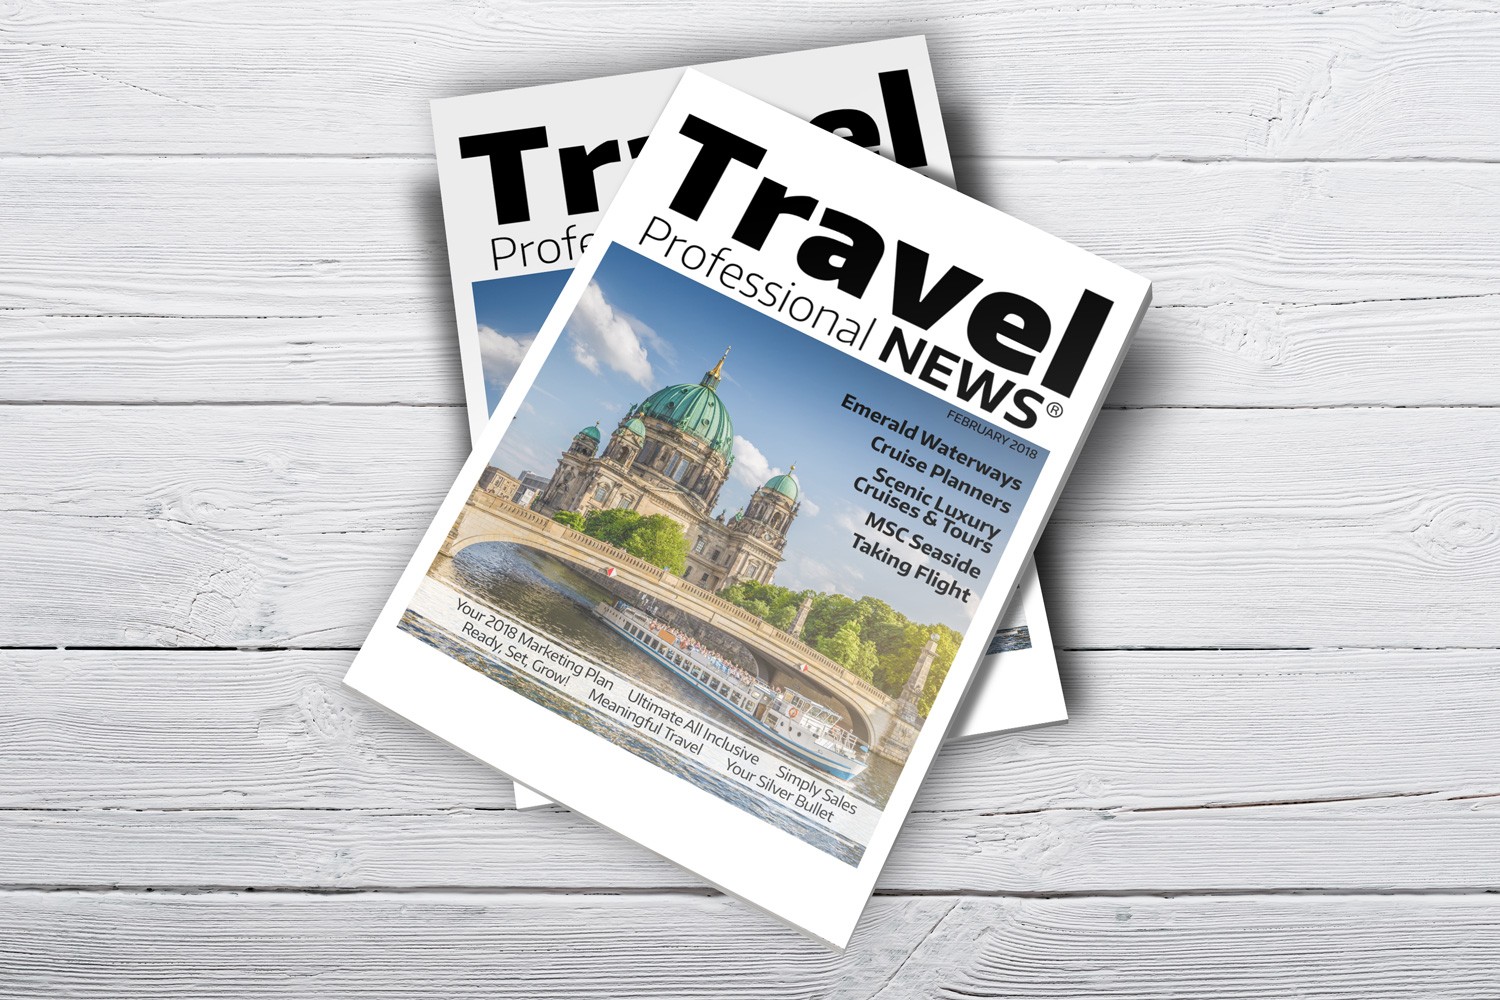 February 2018 Issue – Travel Professional NEWS